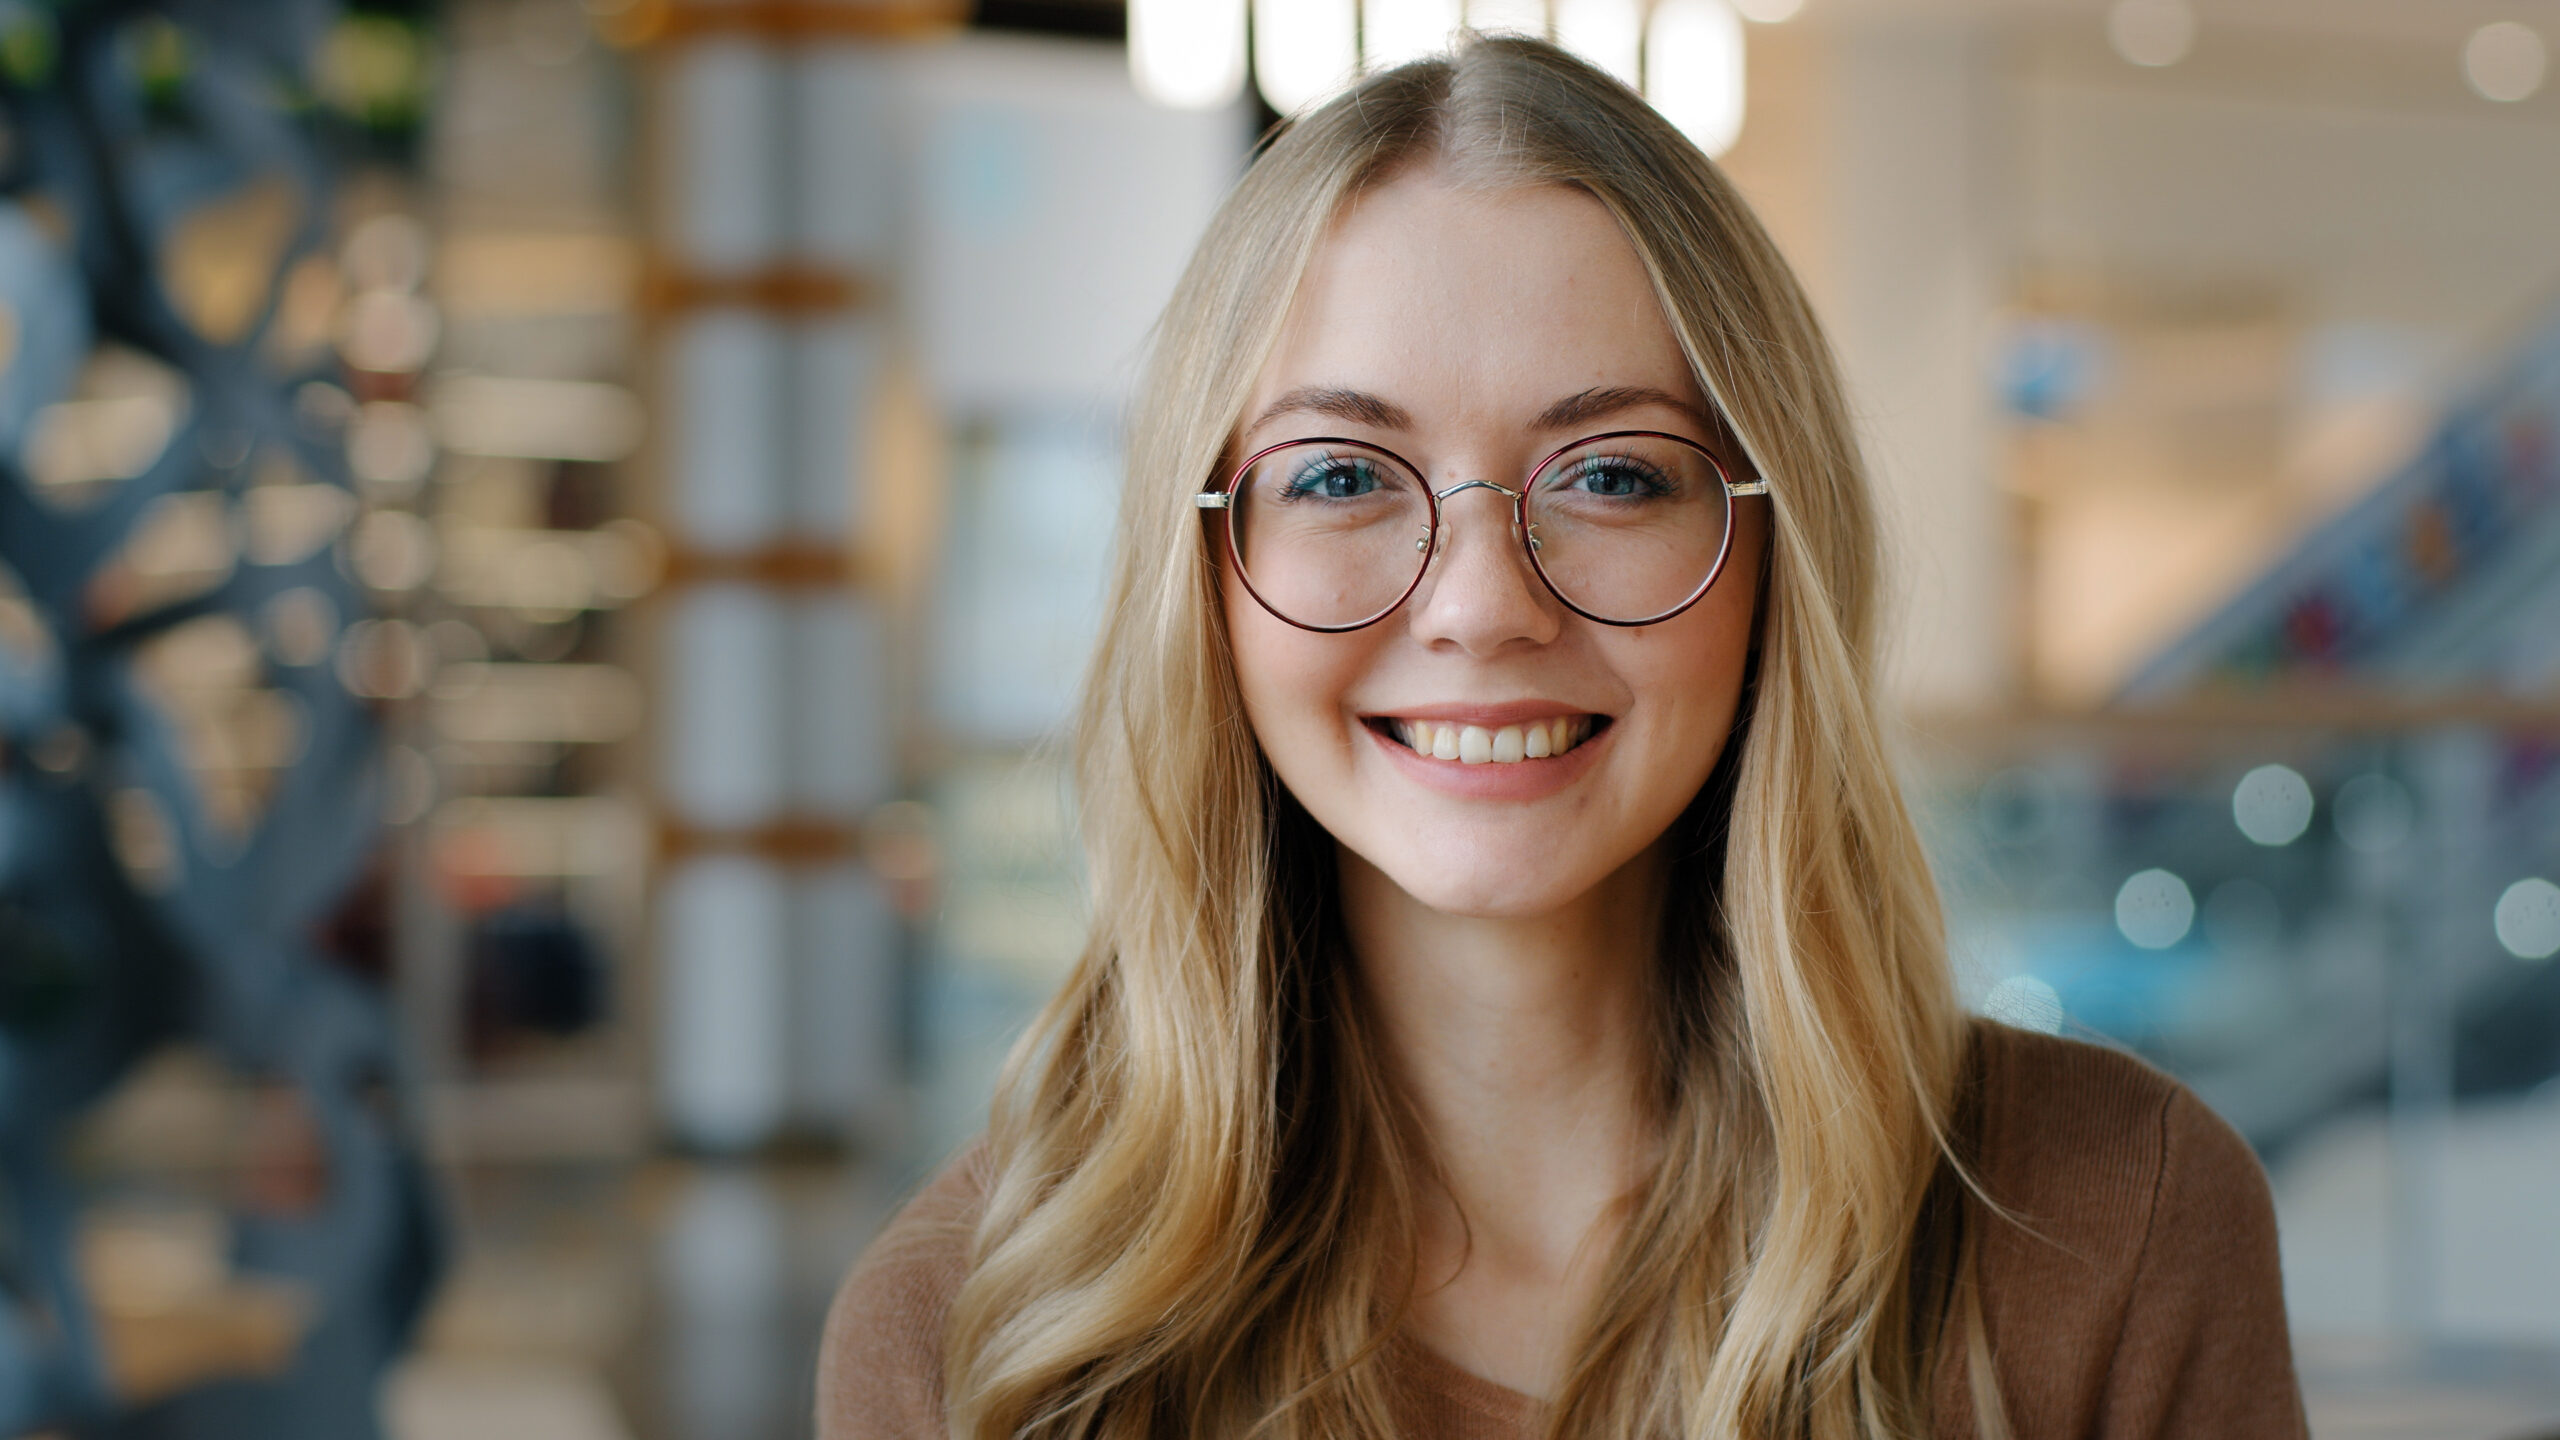 Head shot happy portrait caucasian girl in glasses young woman satisfied with ophthalmology services millennial blonde with healthy white toothy smile looking at camera confident model posing indoors. High quality photo